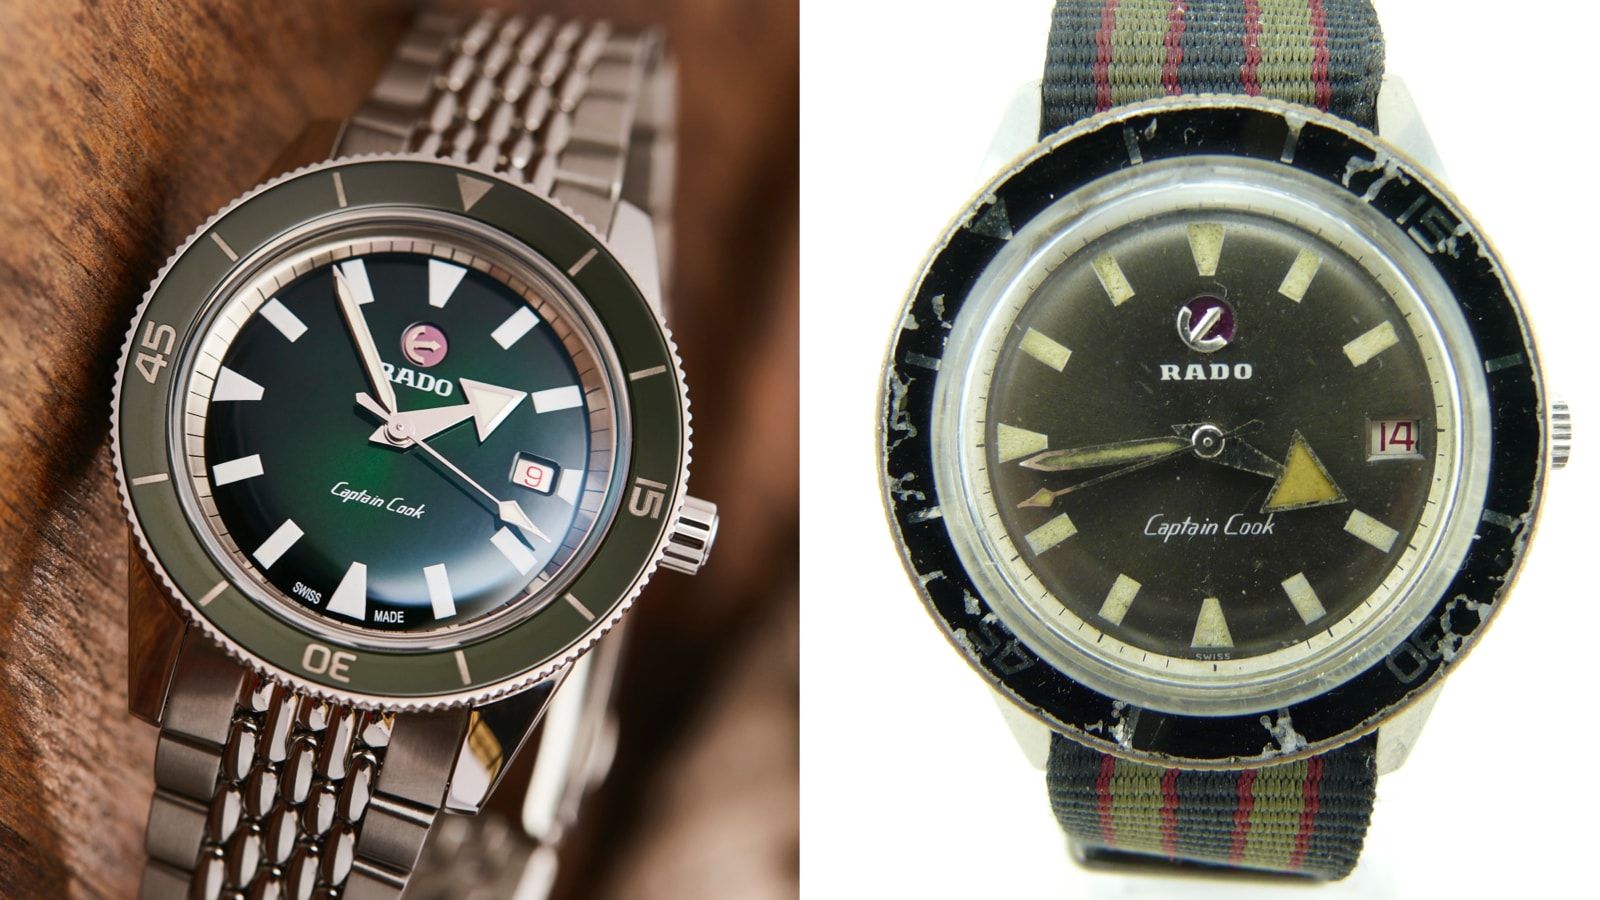 Comparison of Rado Captain Cook watch 2019 and 1962